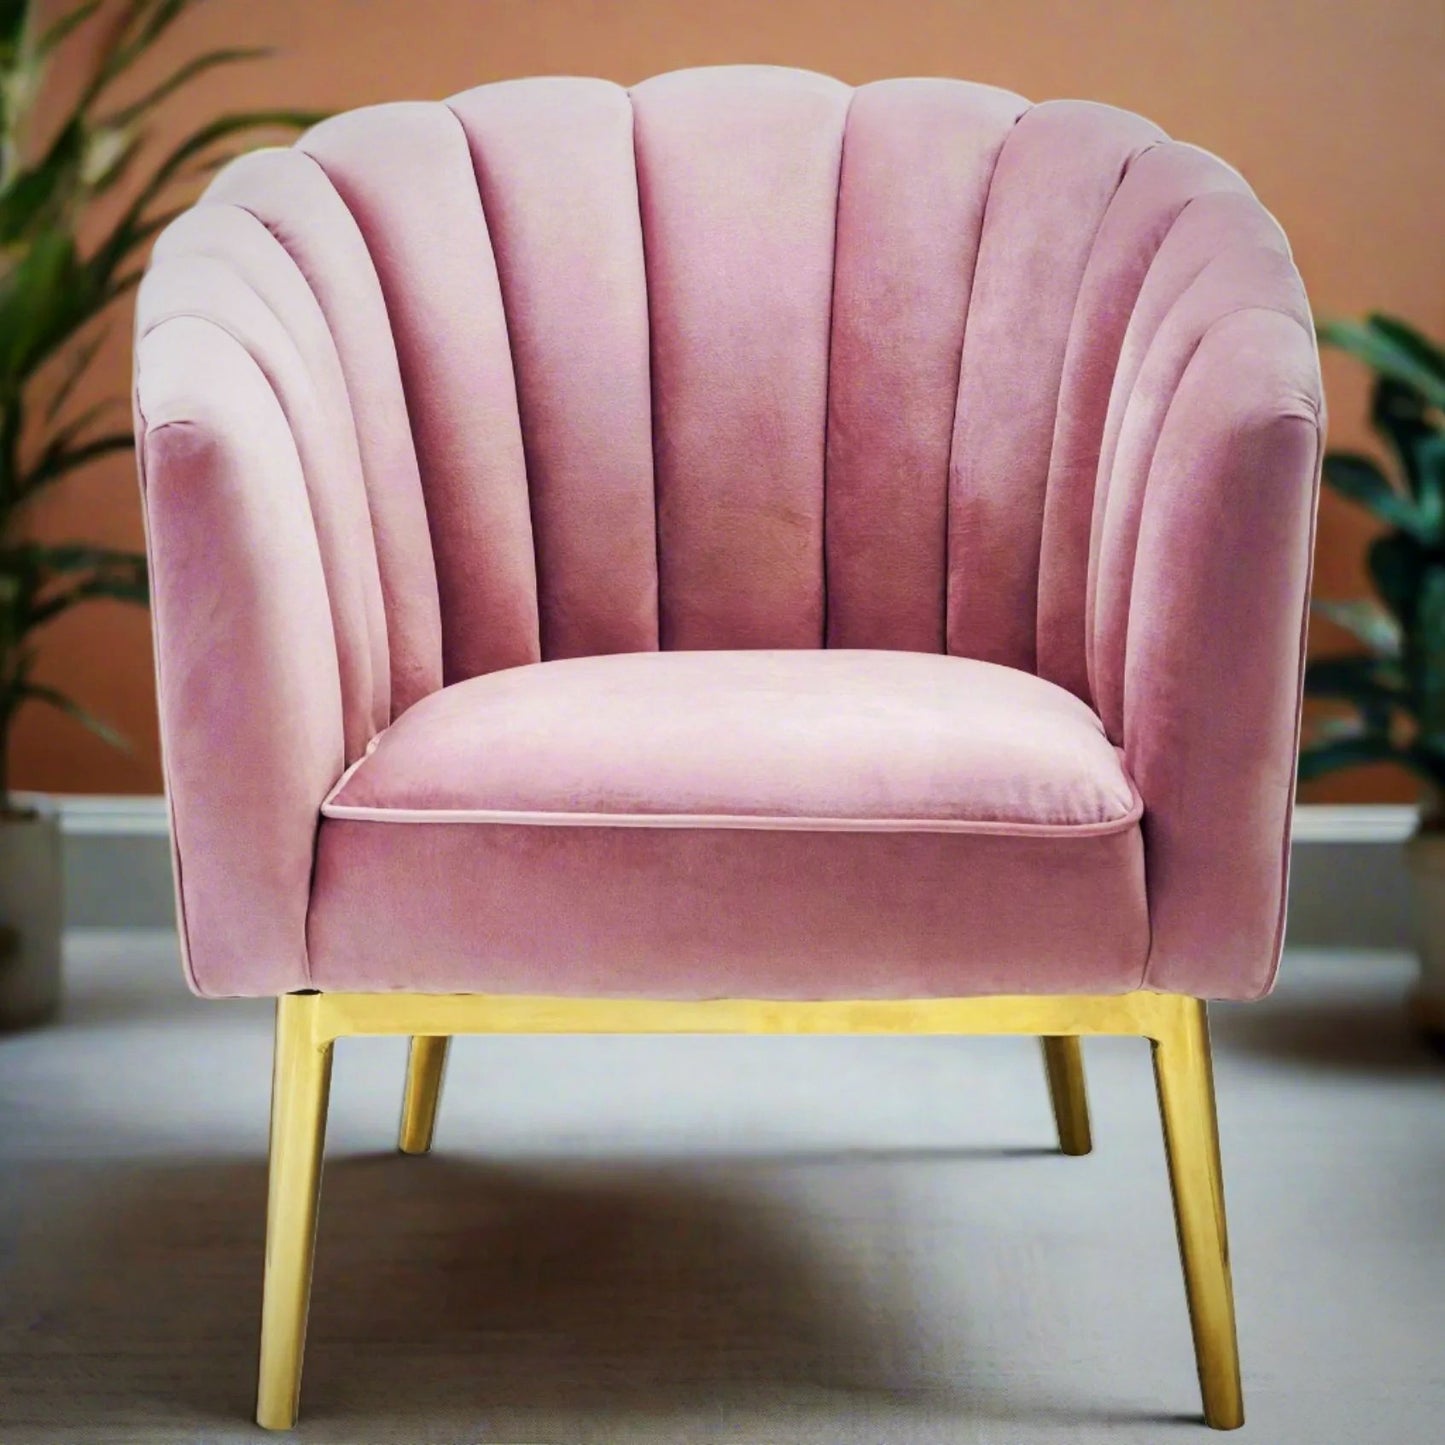 Pinkny Accent Chair